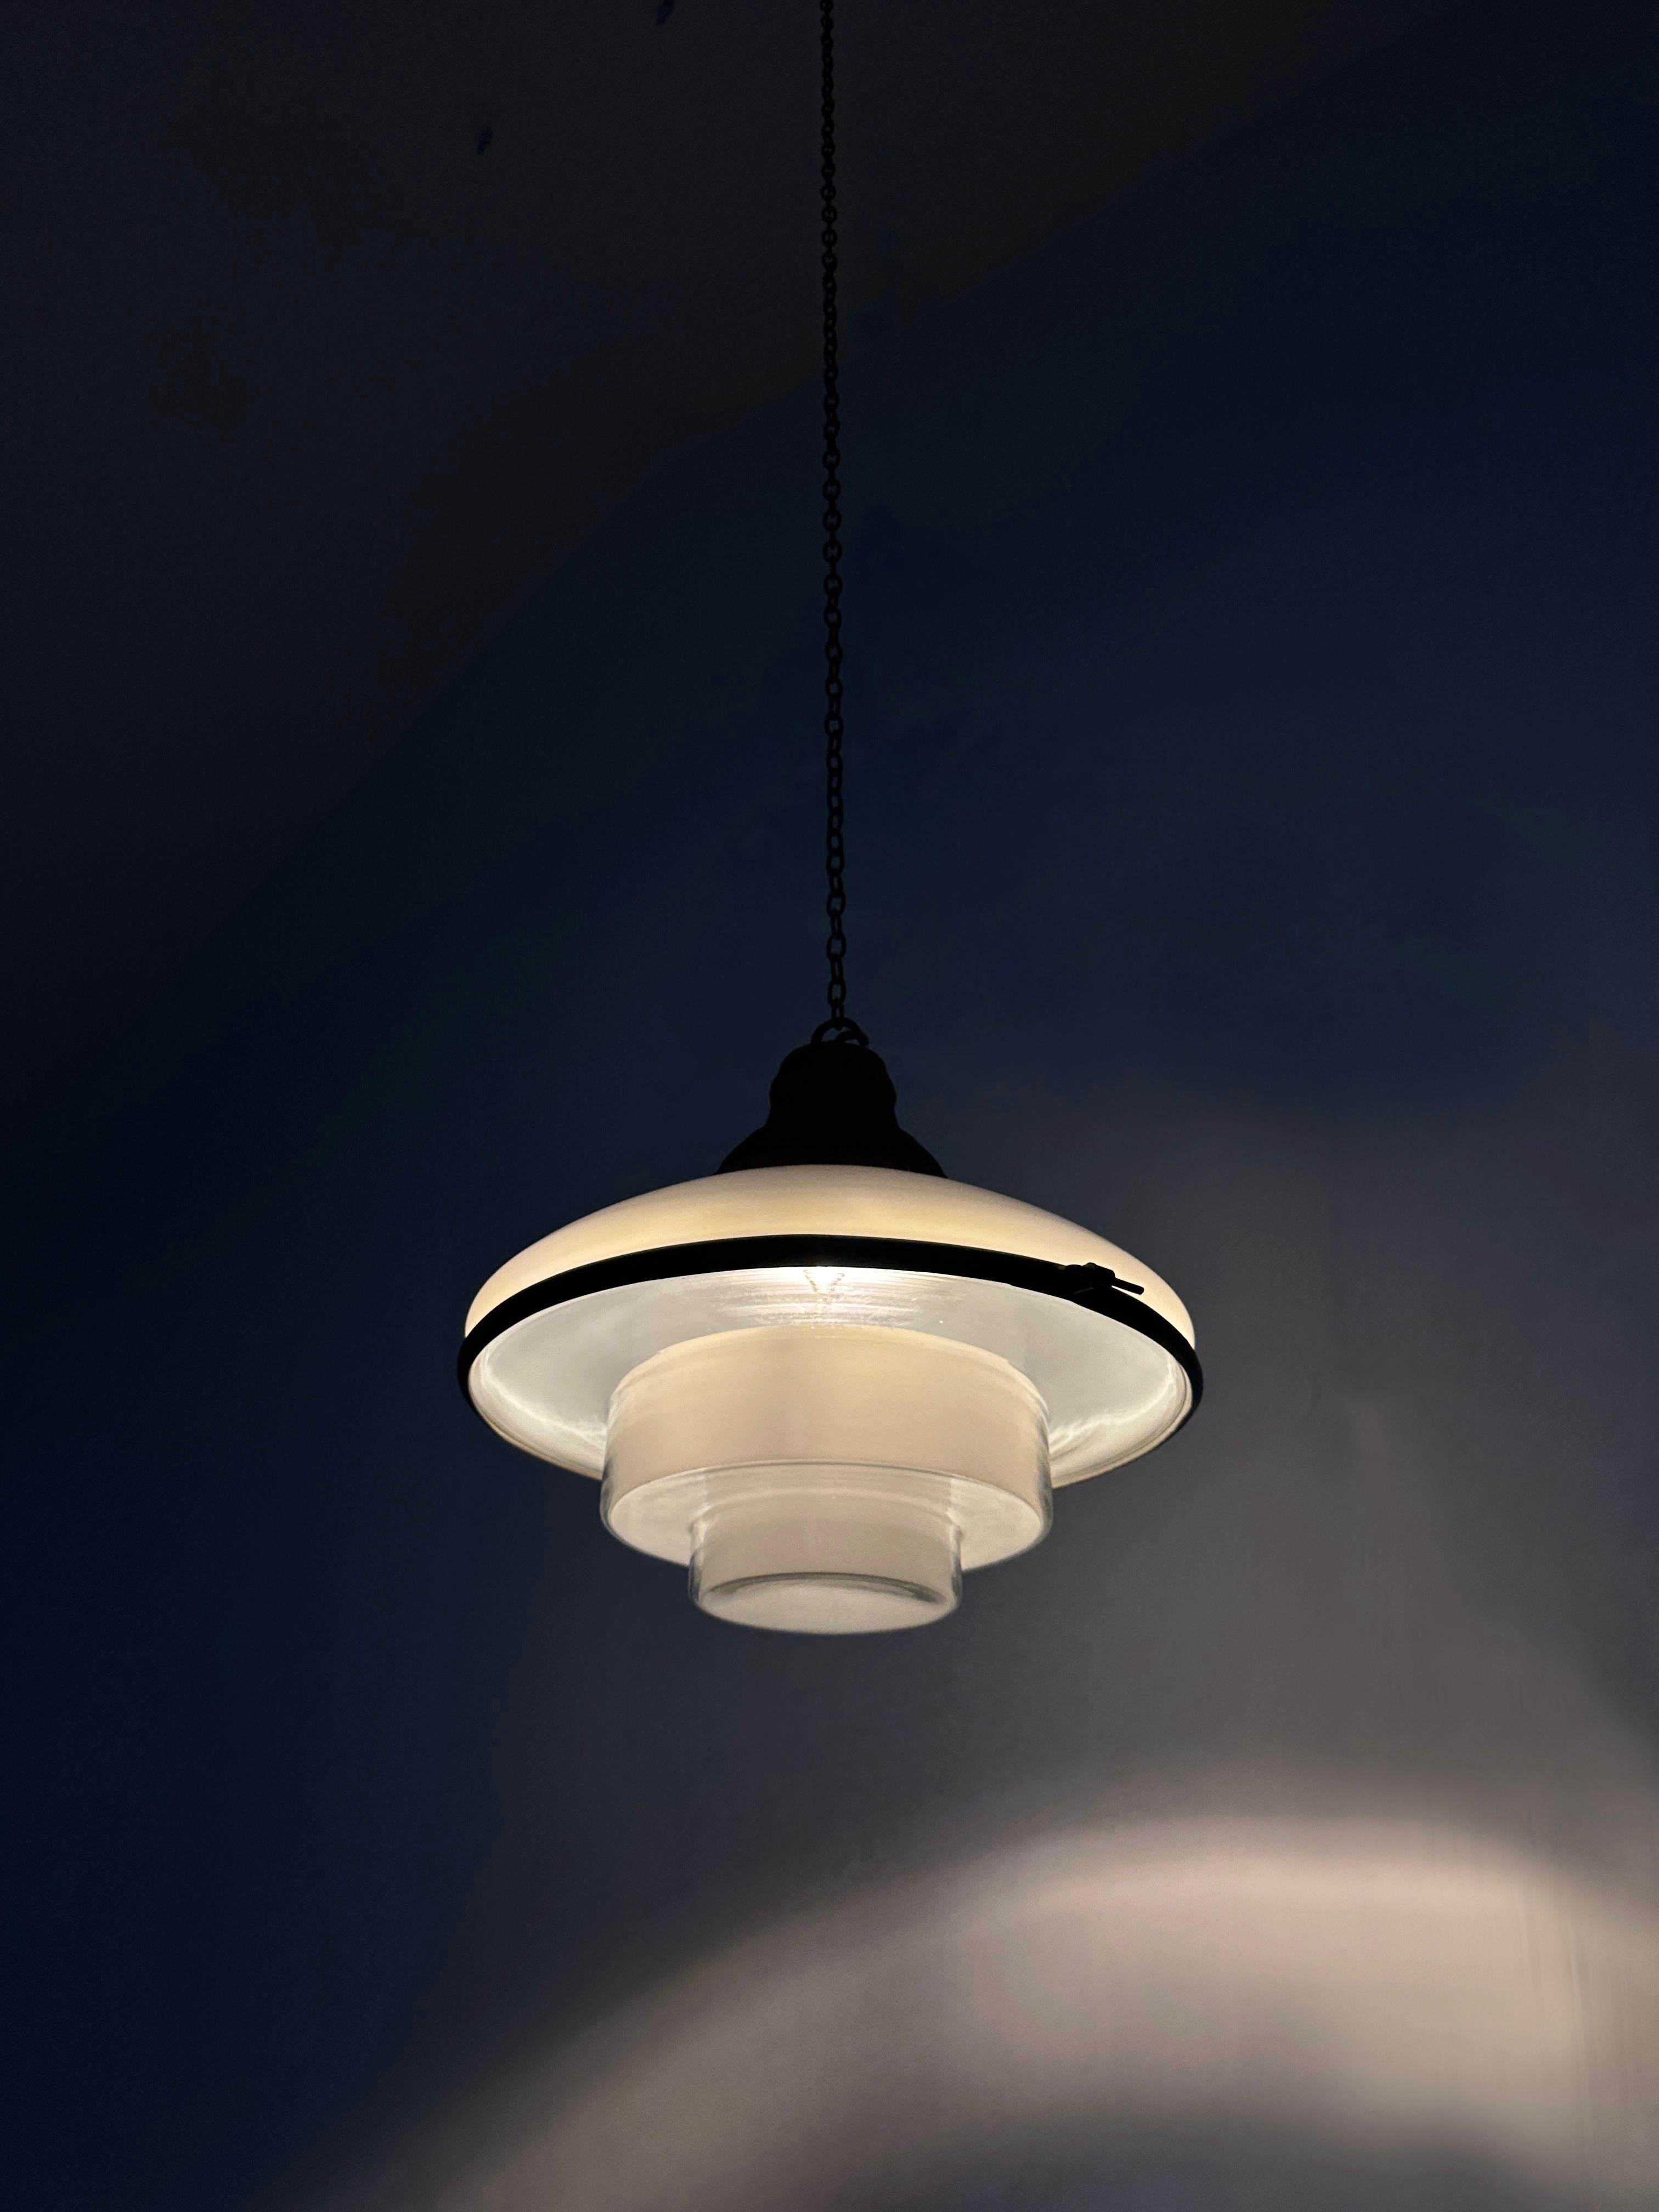 Antique Bauhaus Sistrah Opaline Milk Glass Ceiling Pendant Light by Otto Muller In Good Condition For Sale In Sale, GB